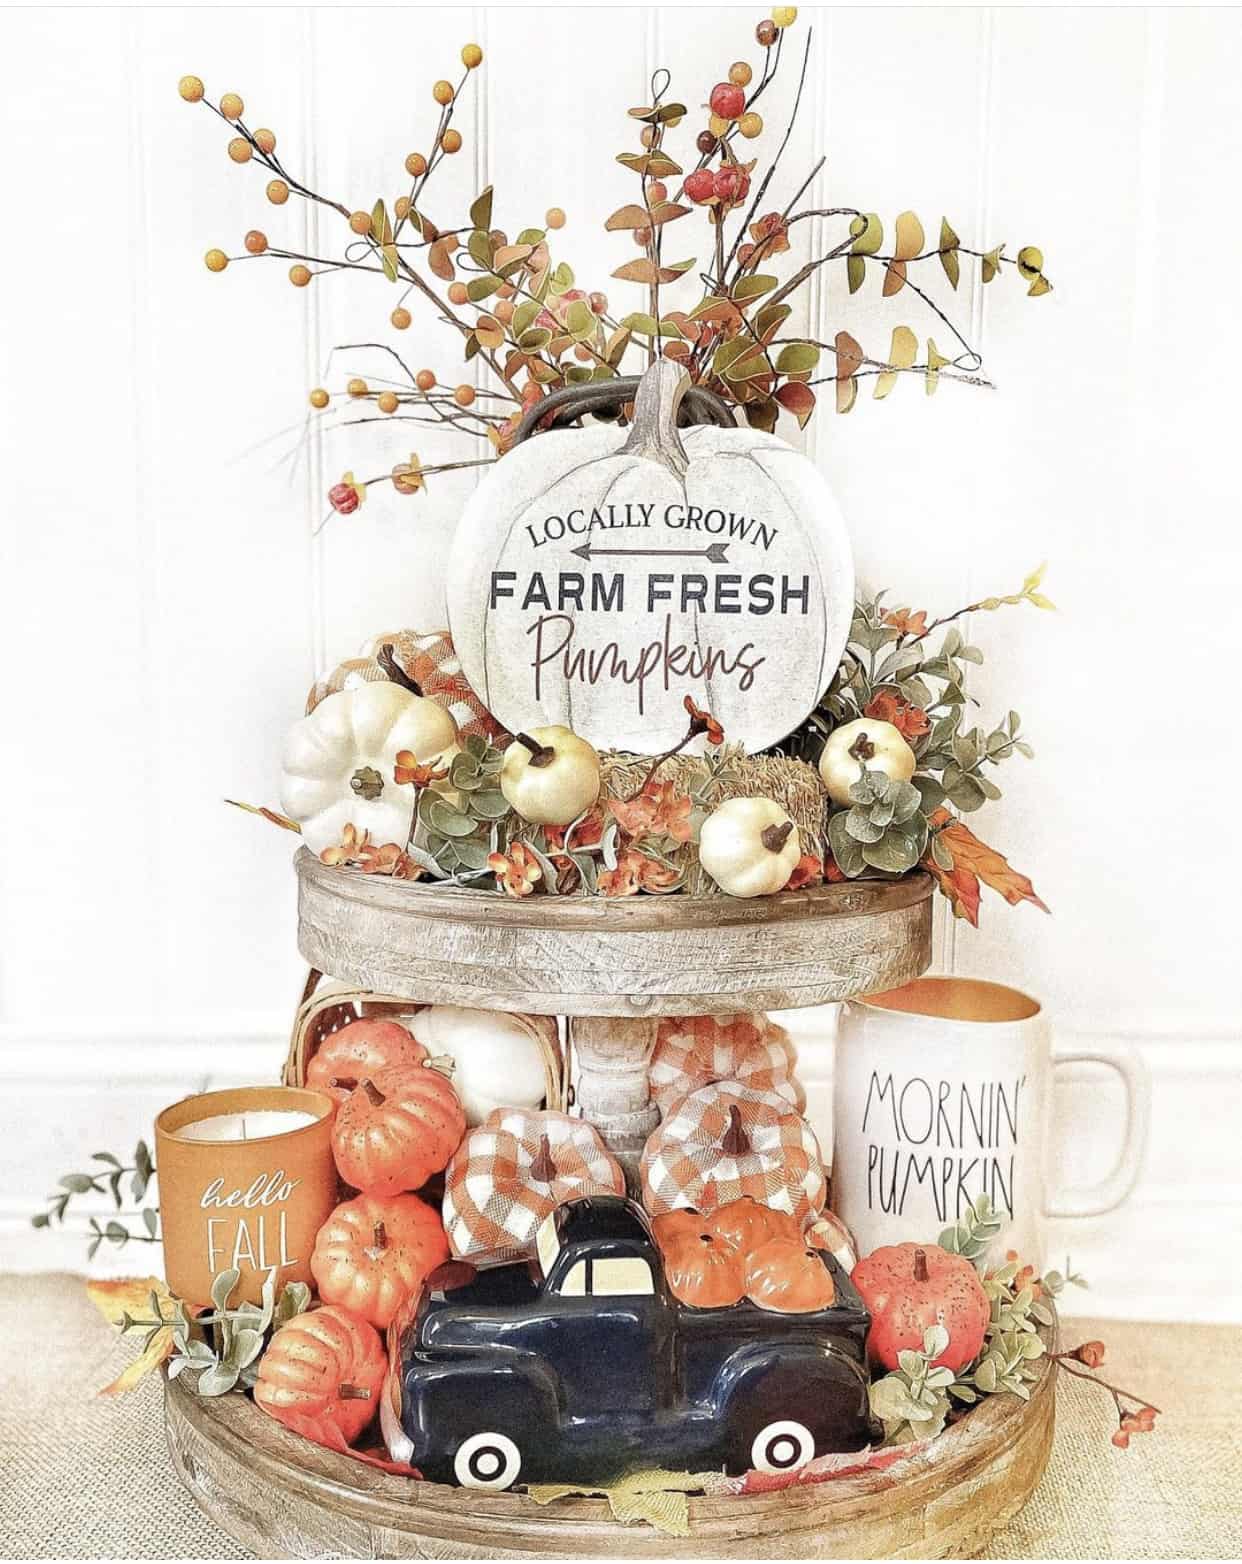 Rustic tiered tray styled for fall with mini pumpkins, eucalyptus sprigs, and fall berries